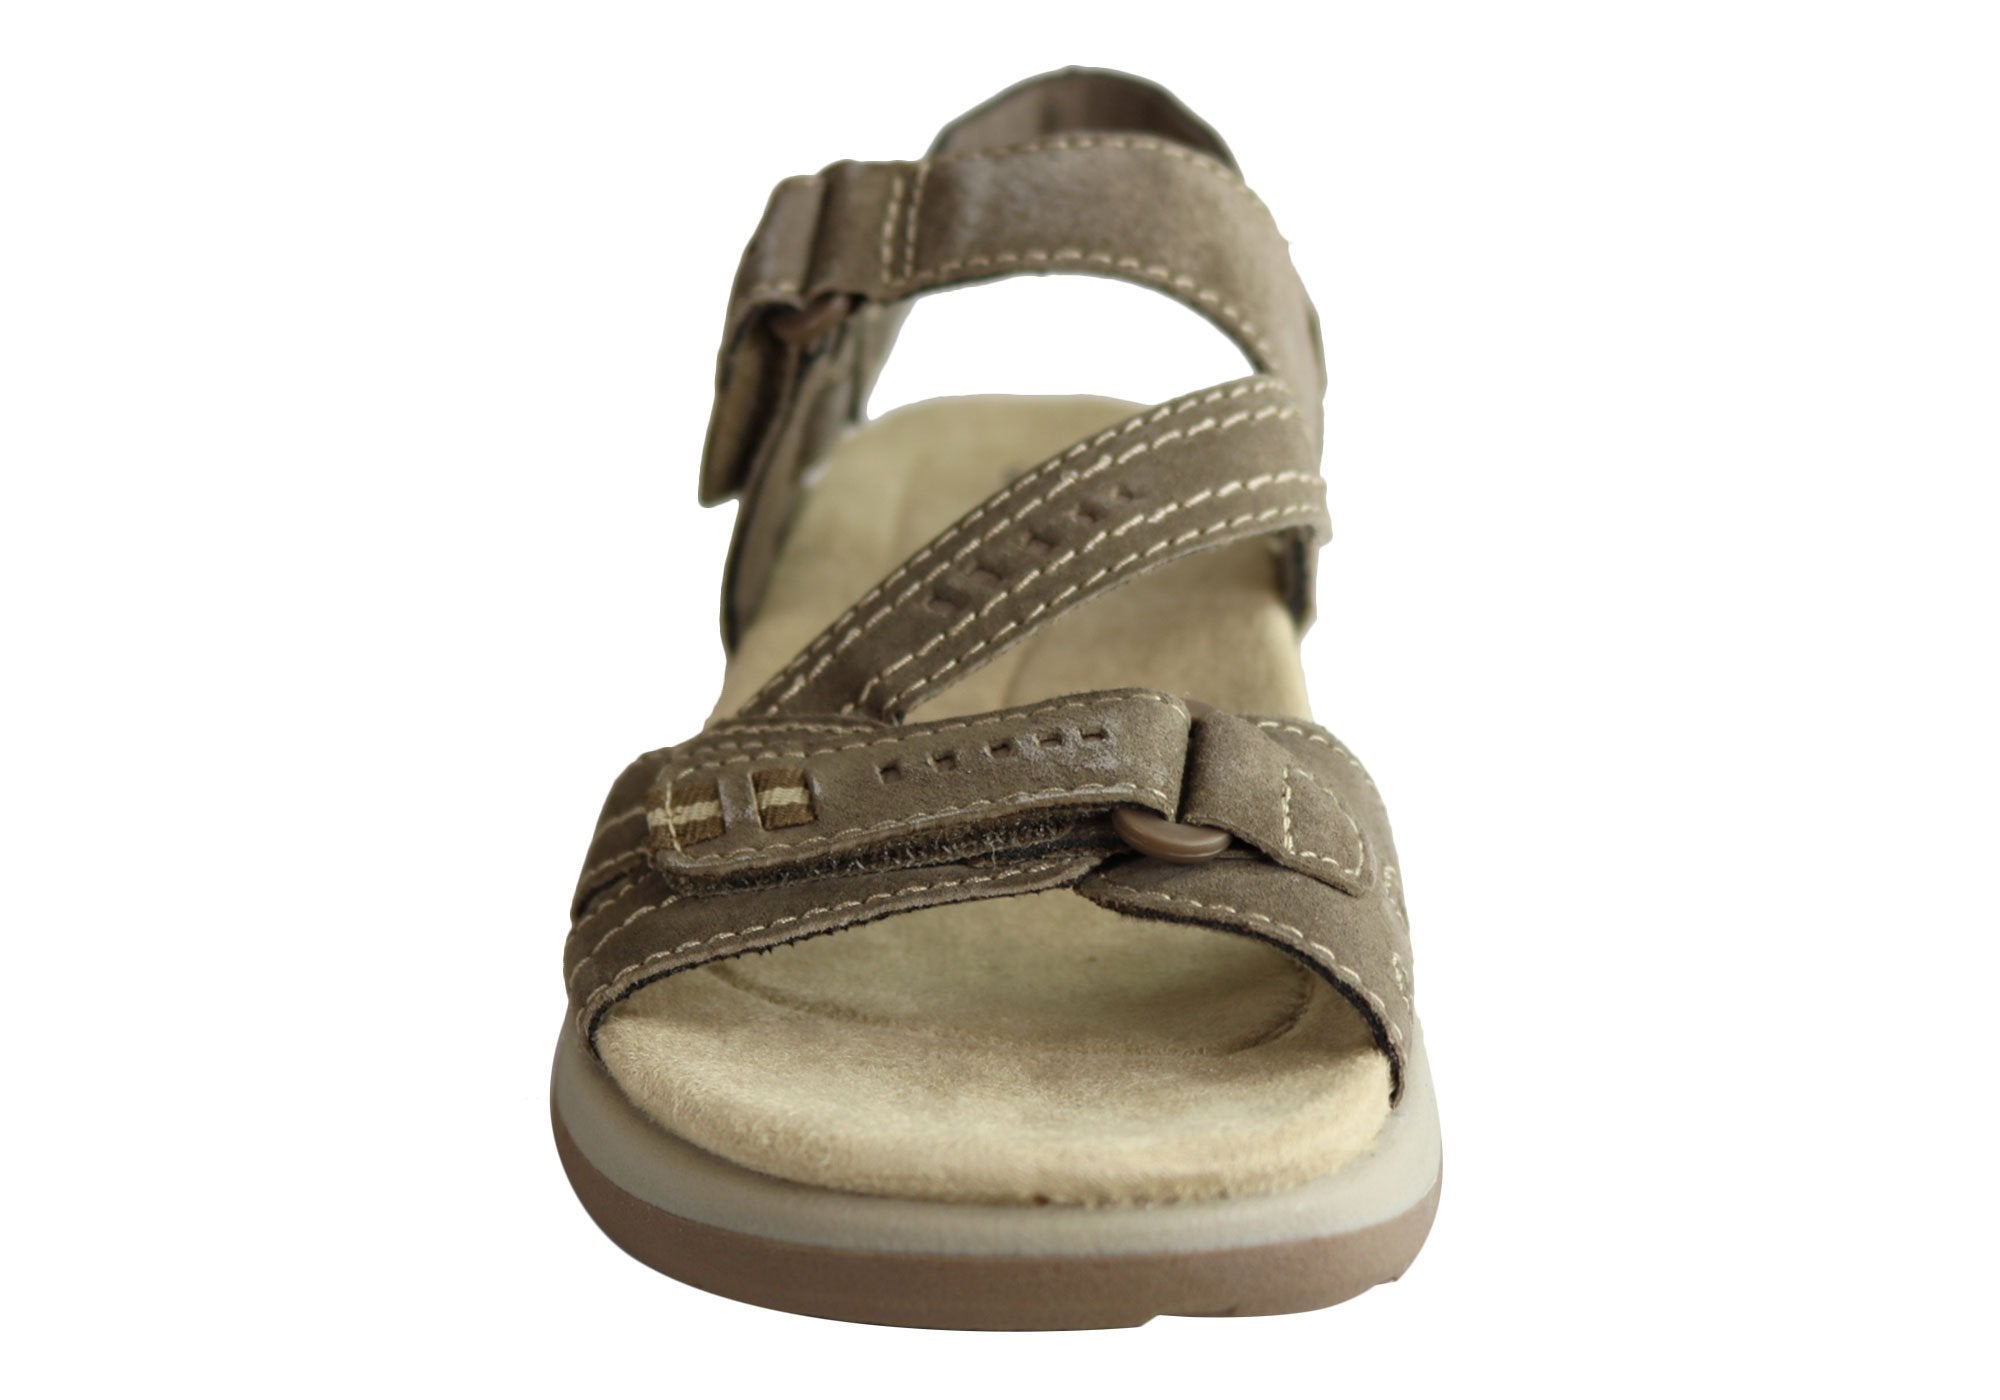 Planet Shoes Birdie Womens Comfortable Leather Wide Width Sandals